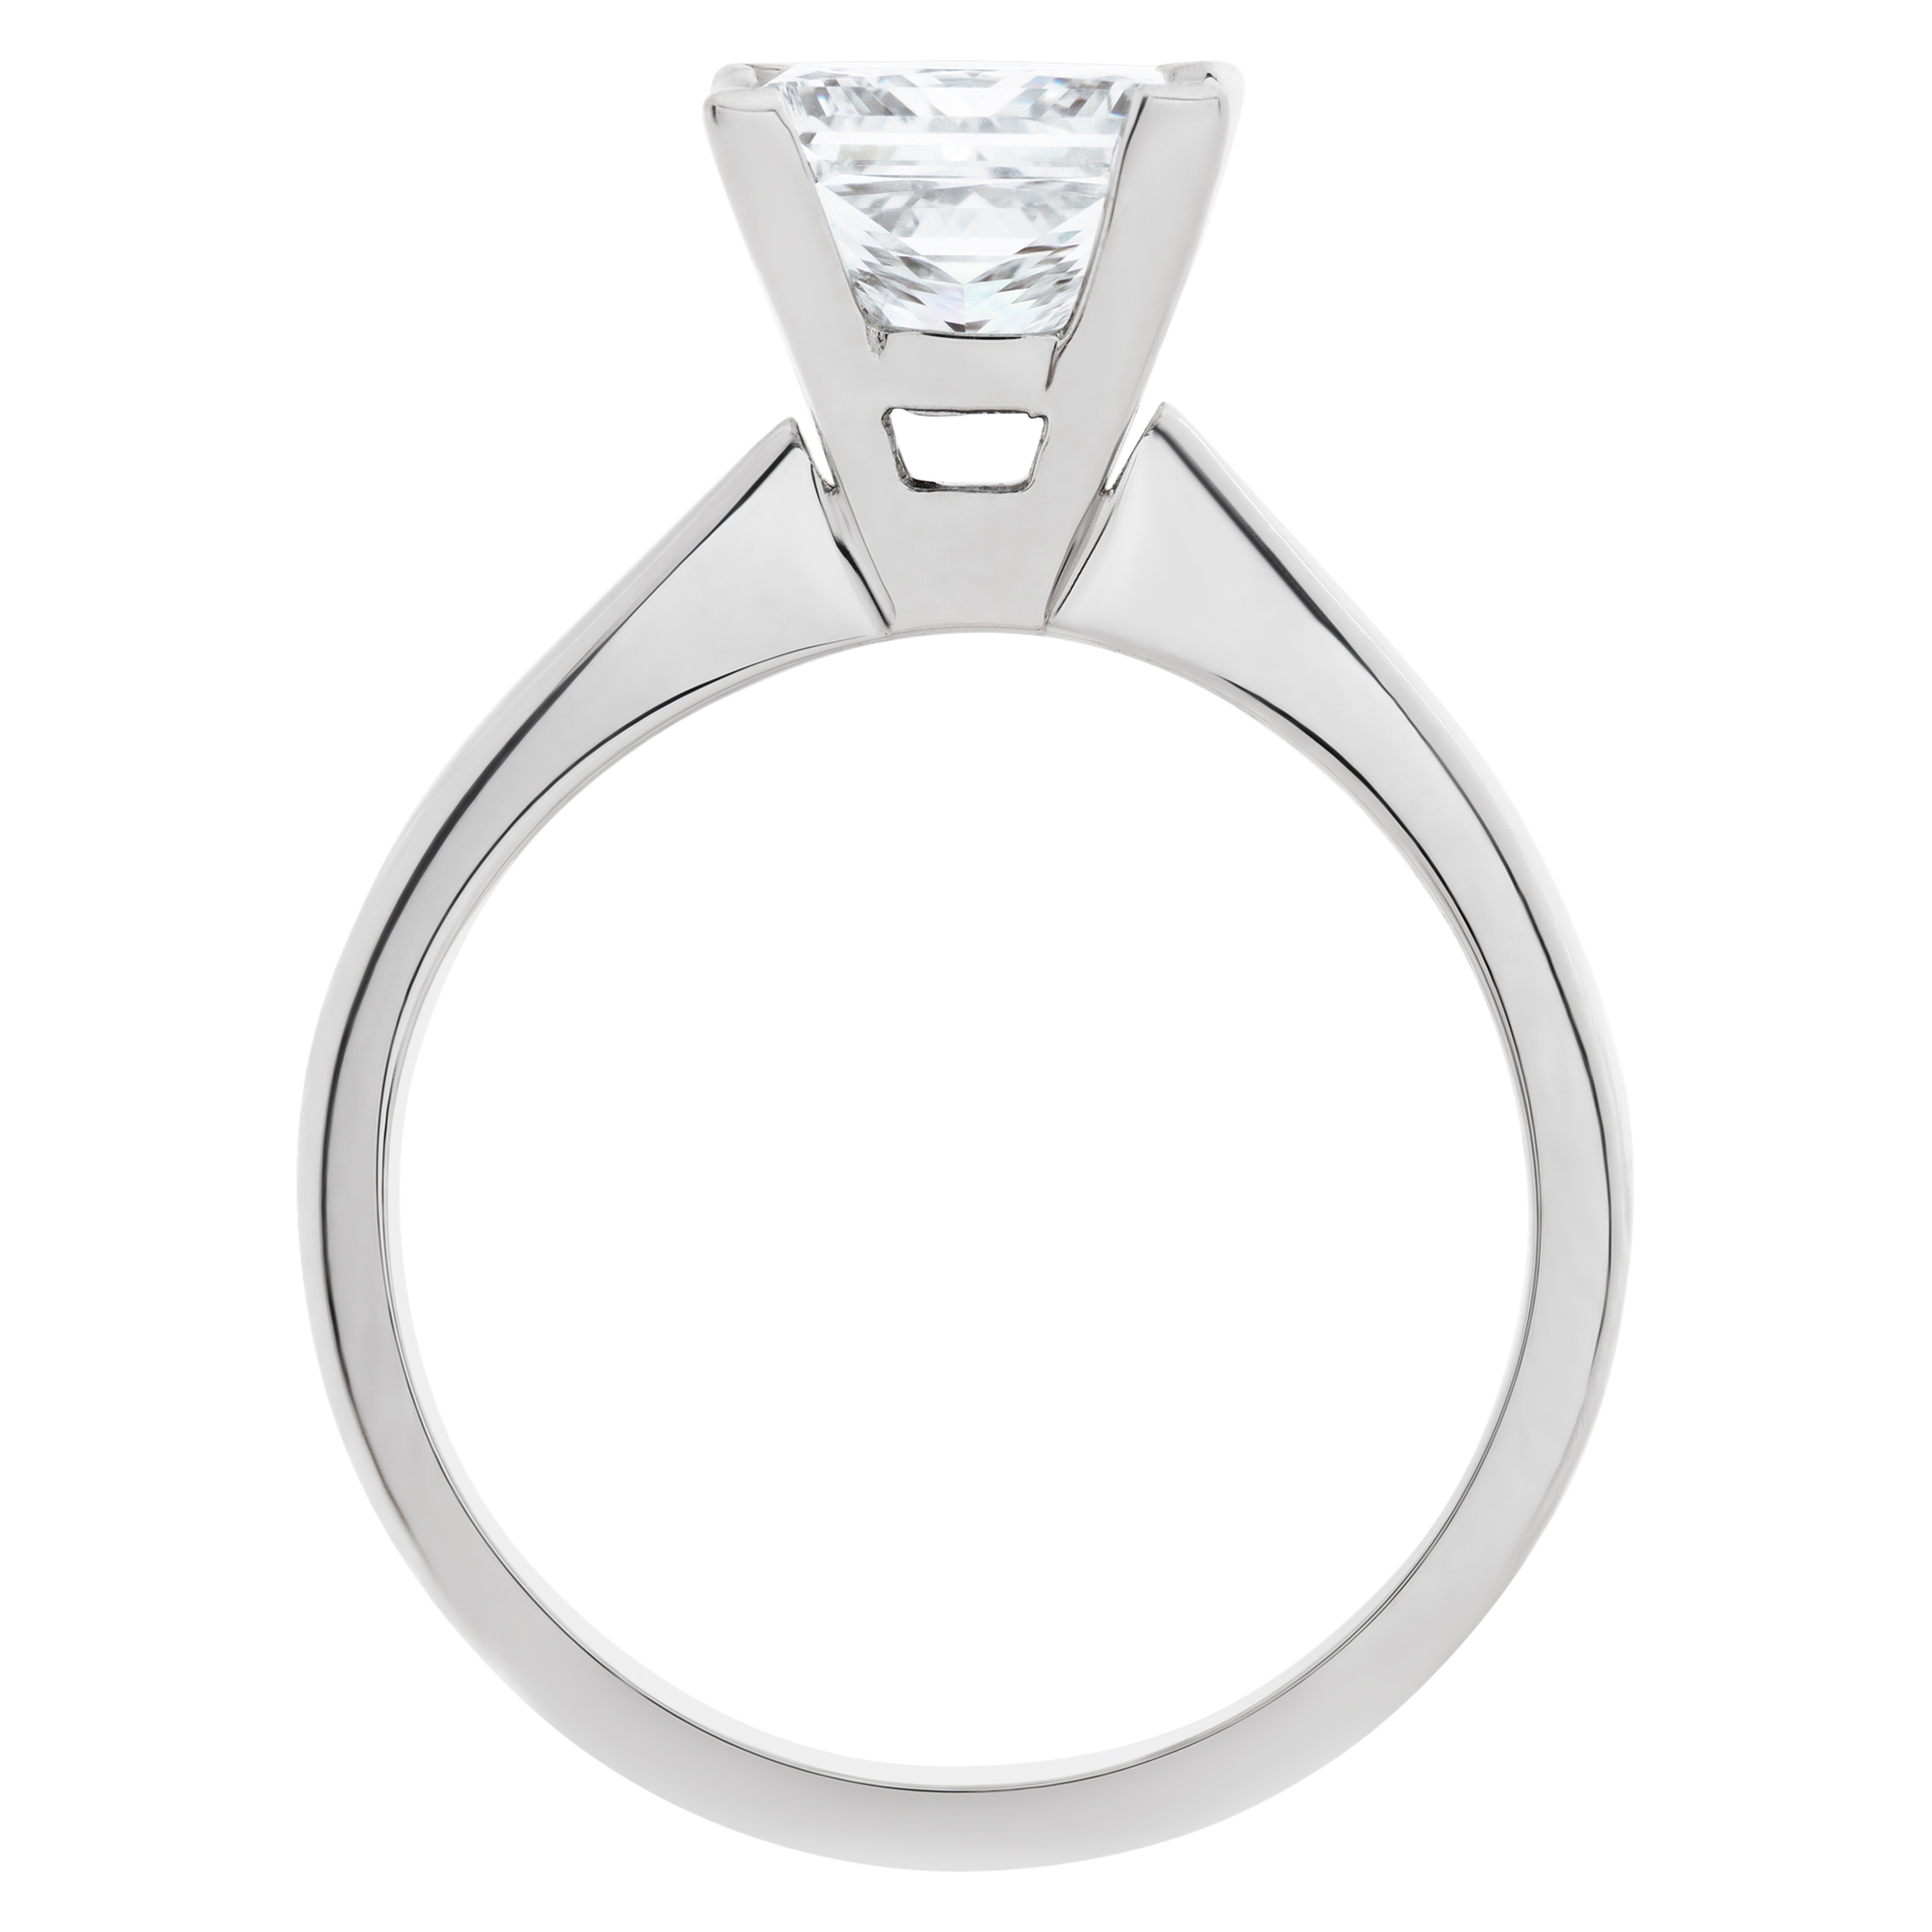 GIA certified princess cut diamond 2.09 carat (J color, SI1 clarity) solitaire ring image 4